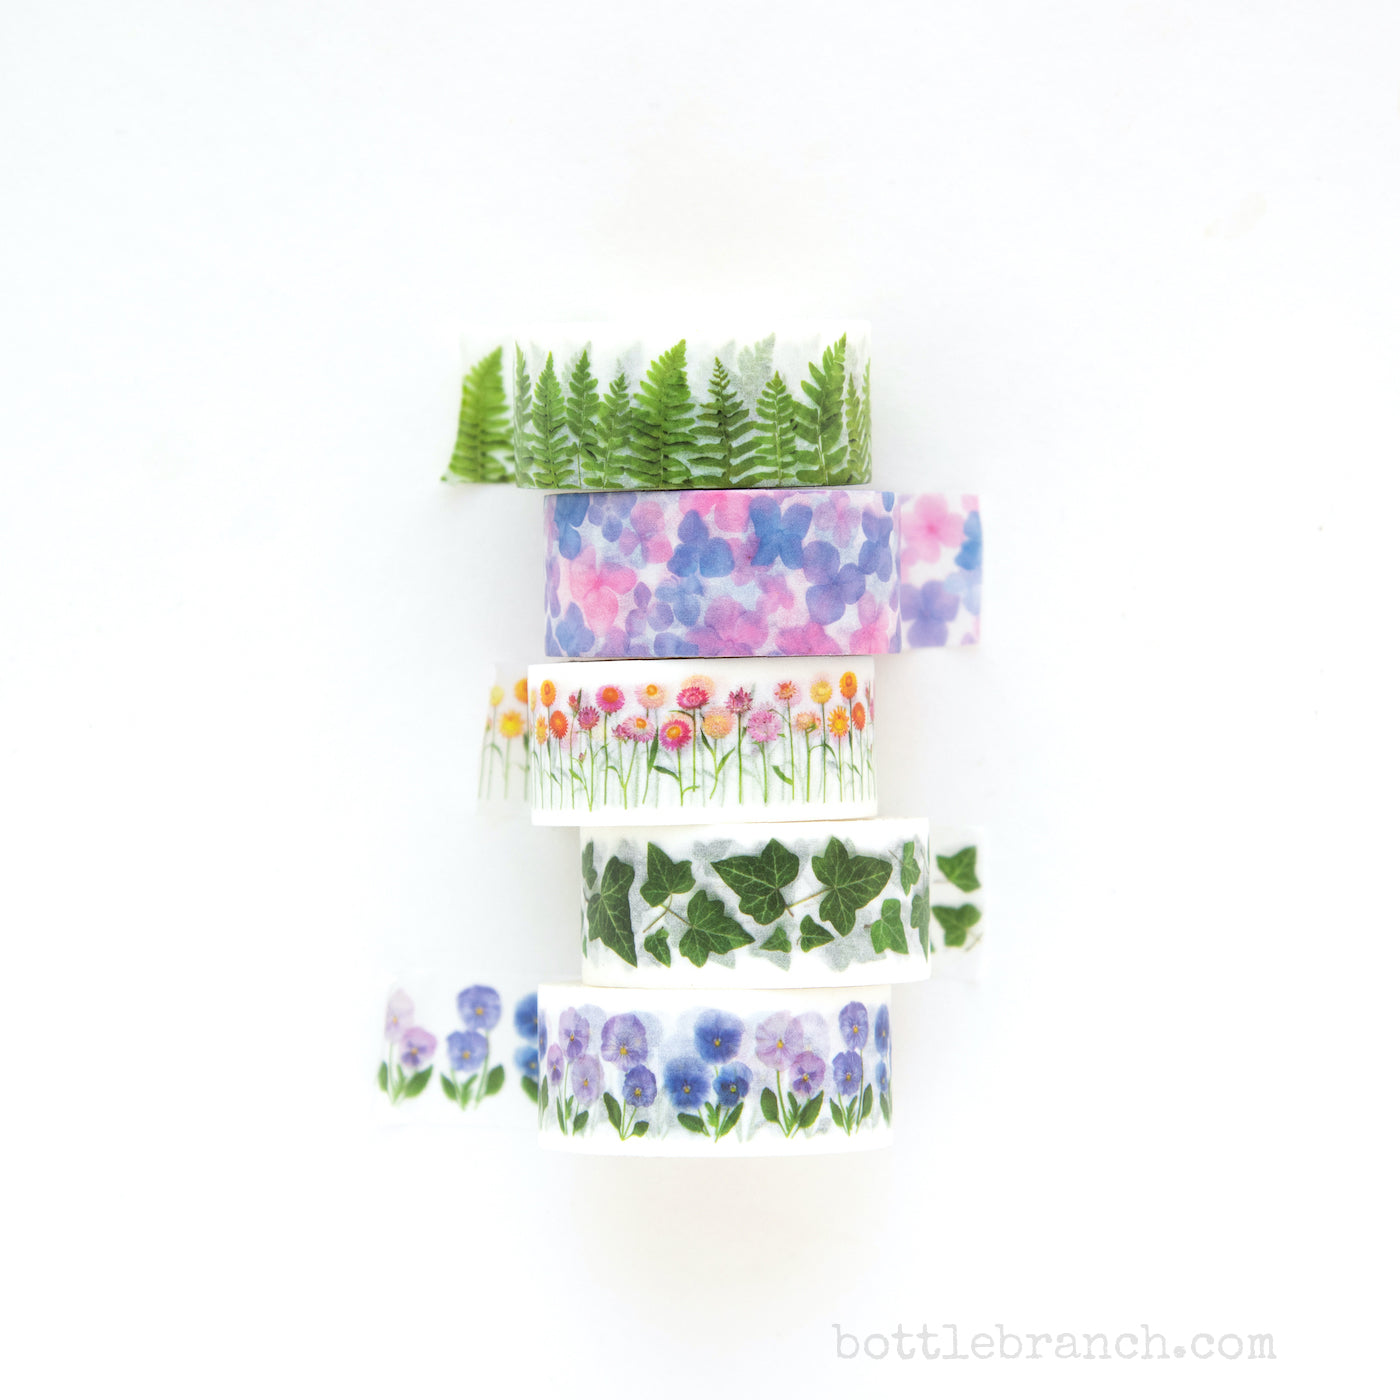 all bottle branch washi flowers and leaves